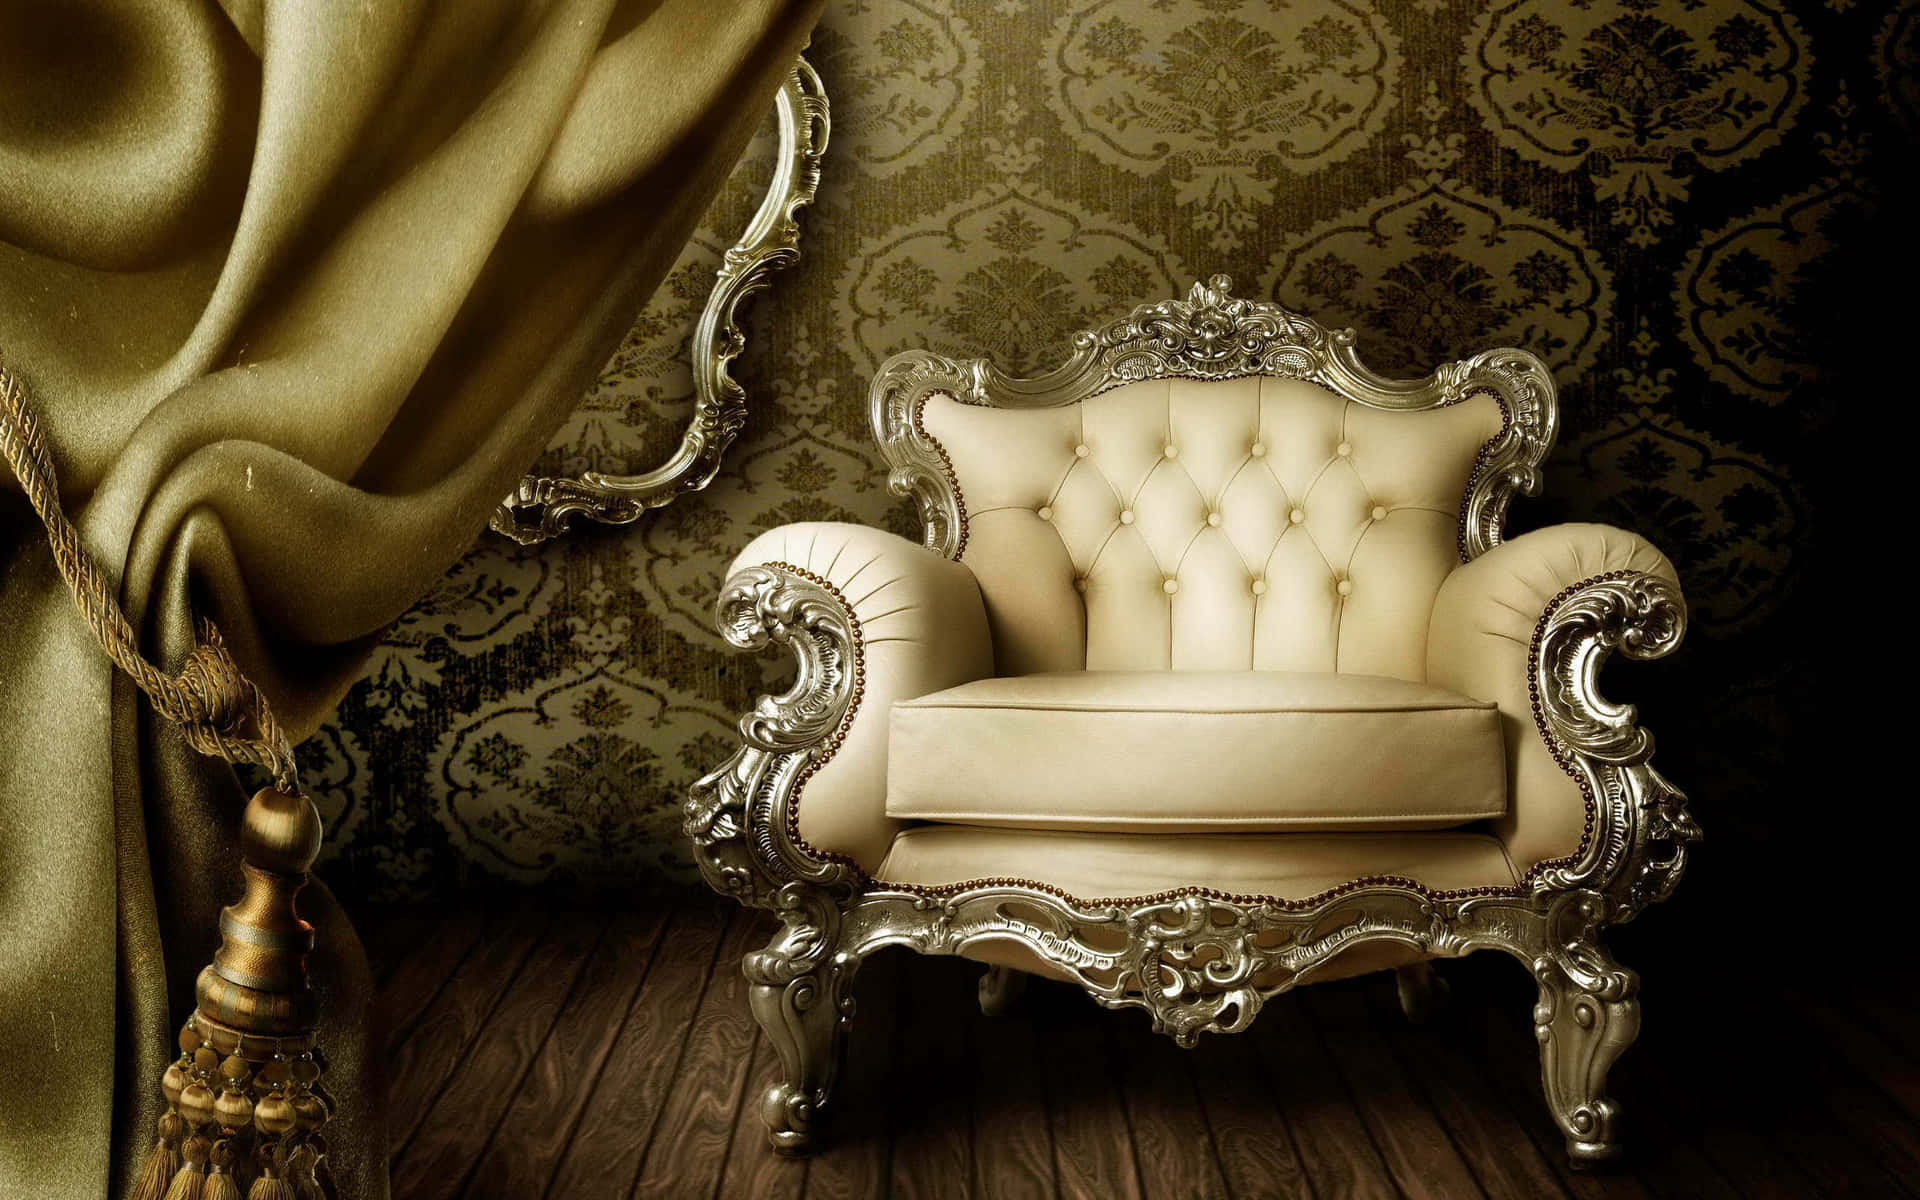 An Ornate Chair In Front Of A Gold Curtain